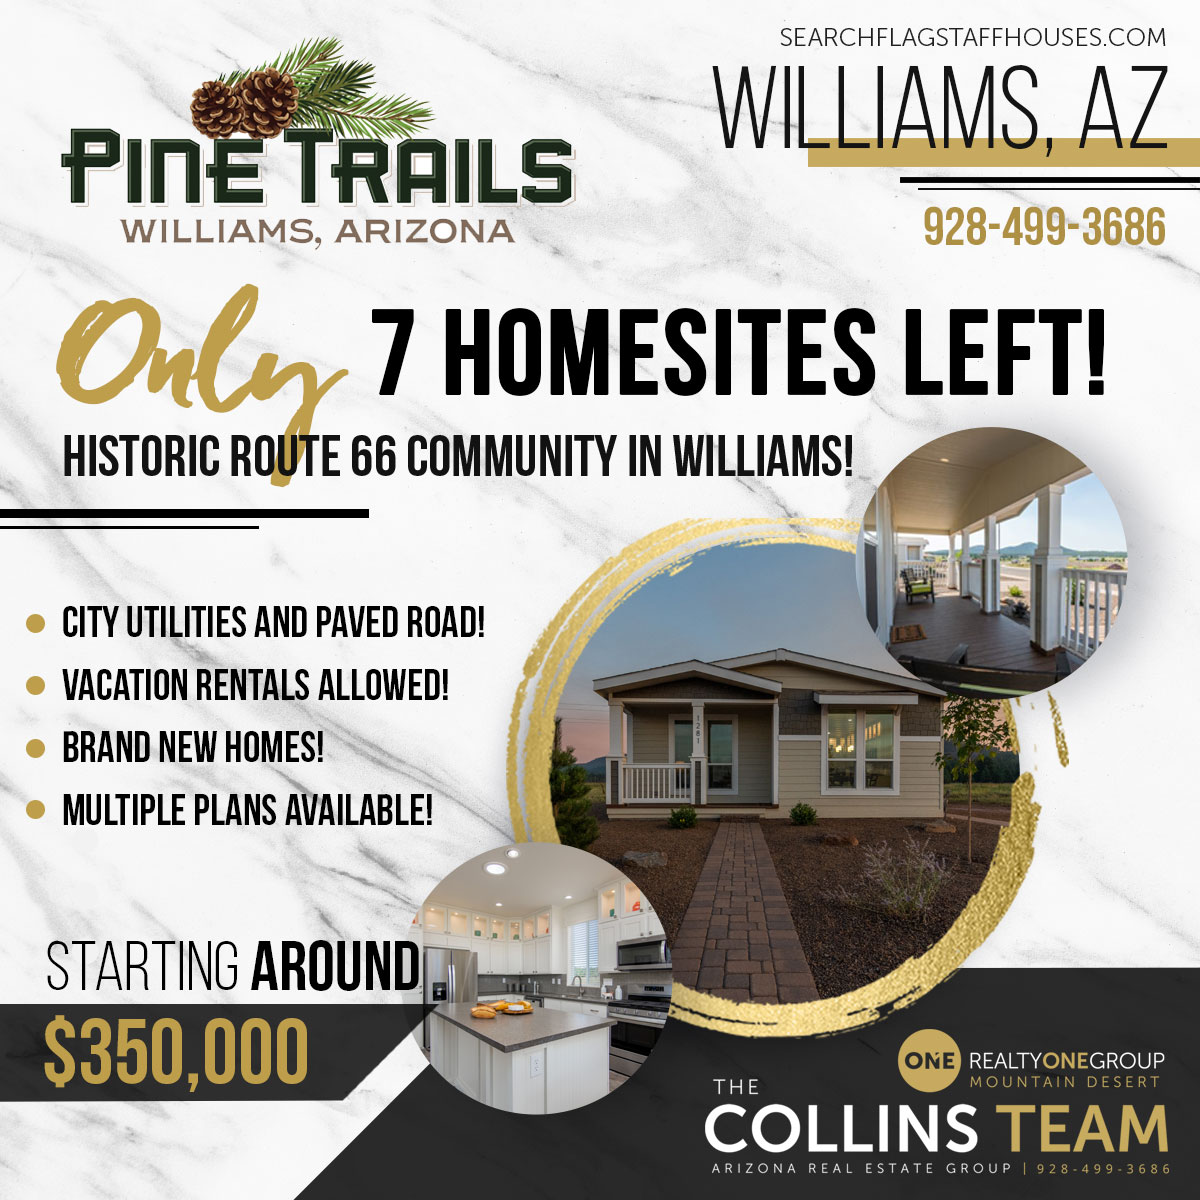 Only 7 Homesites Remaining in Pine Trails - Williams AZ!